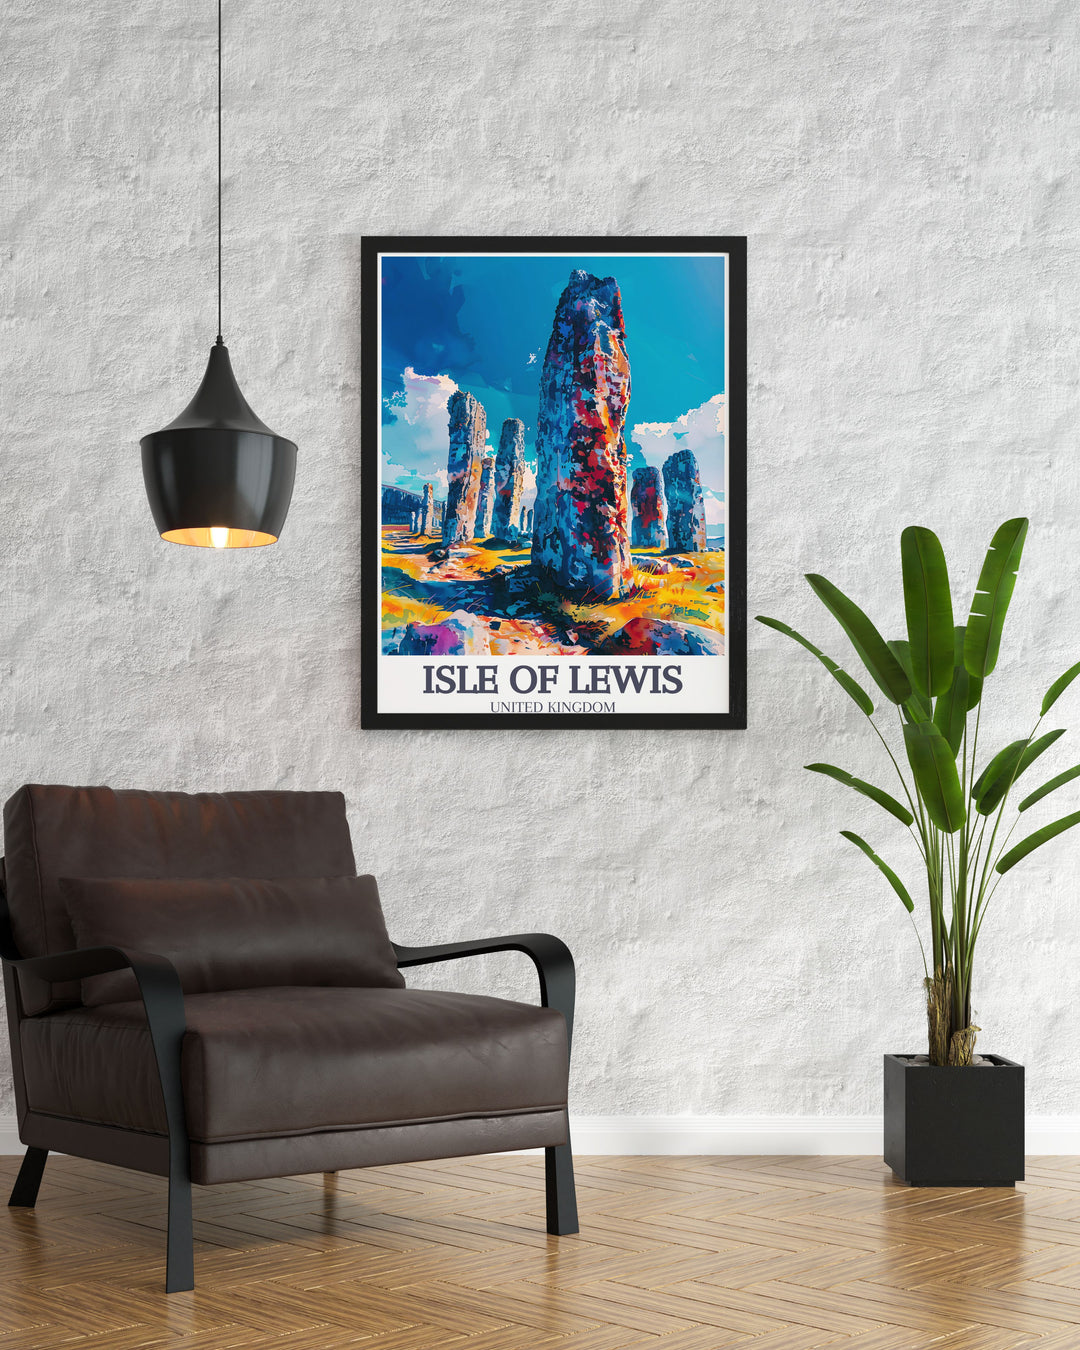 Canvas art depicting the Callanish Stones, one of Scotlands most famous prehistoric sites, offering a glimpse into ancient ceremonies and astronomical observations.